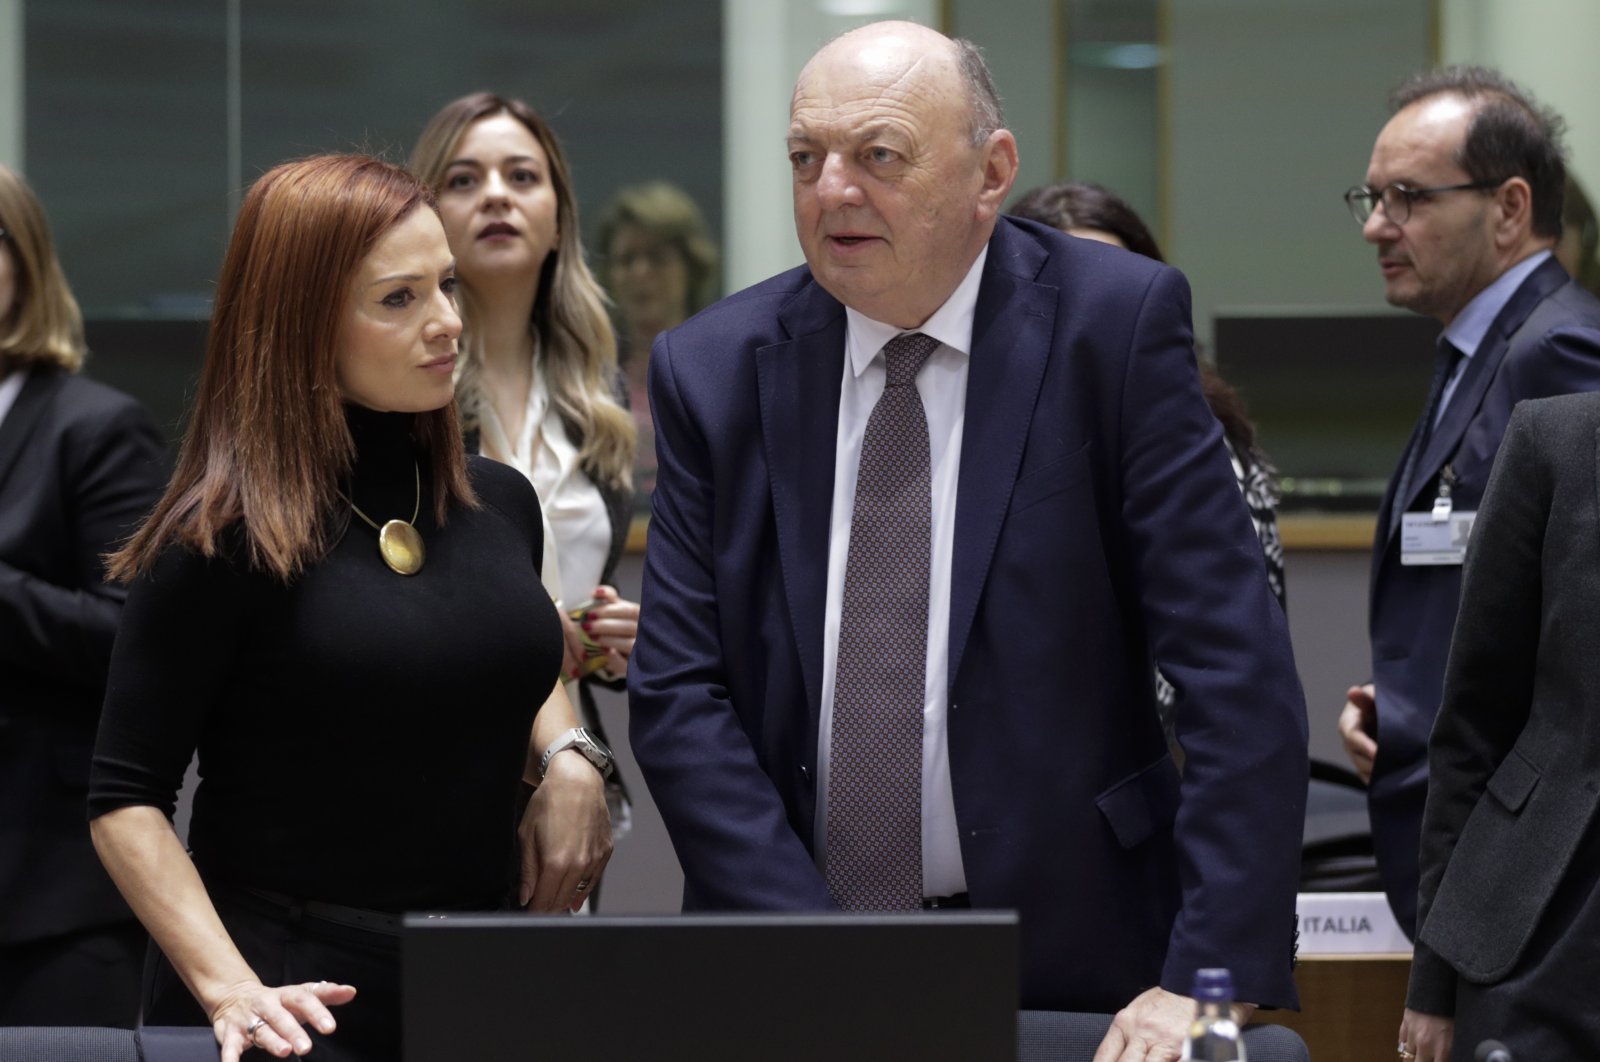 Malta&#039;s Energy Minister Miriam Dalli (Left) and  Italy&#039;s Minister of Environment and Energy Security Gilberto Pichetto Fratin (Right) speak to each other during a Special EU energy council on the energies crisis in Brussels, Belgium, Dec. 19, 2022. (EPA Photo)